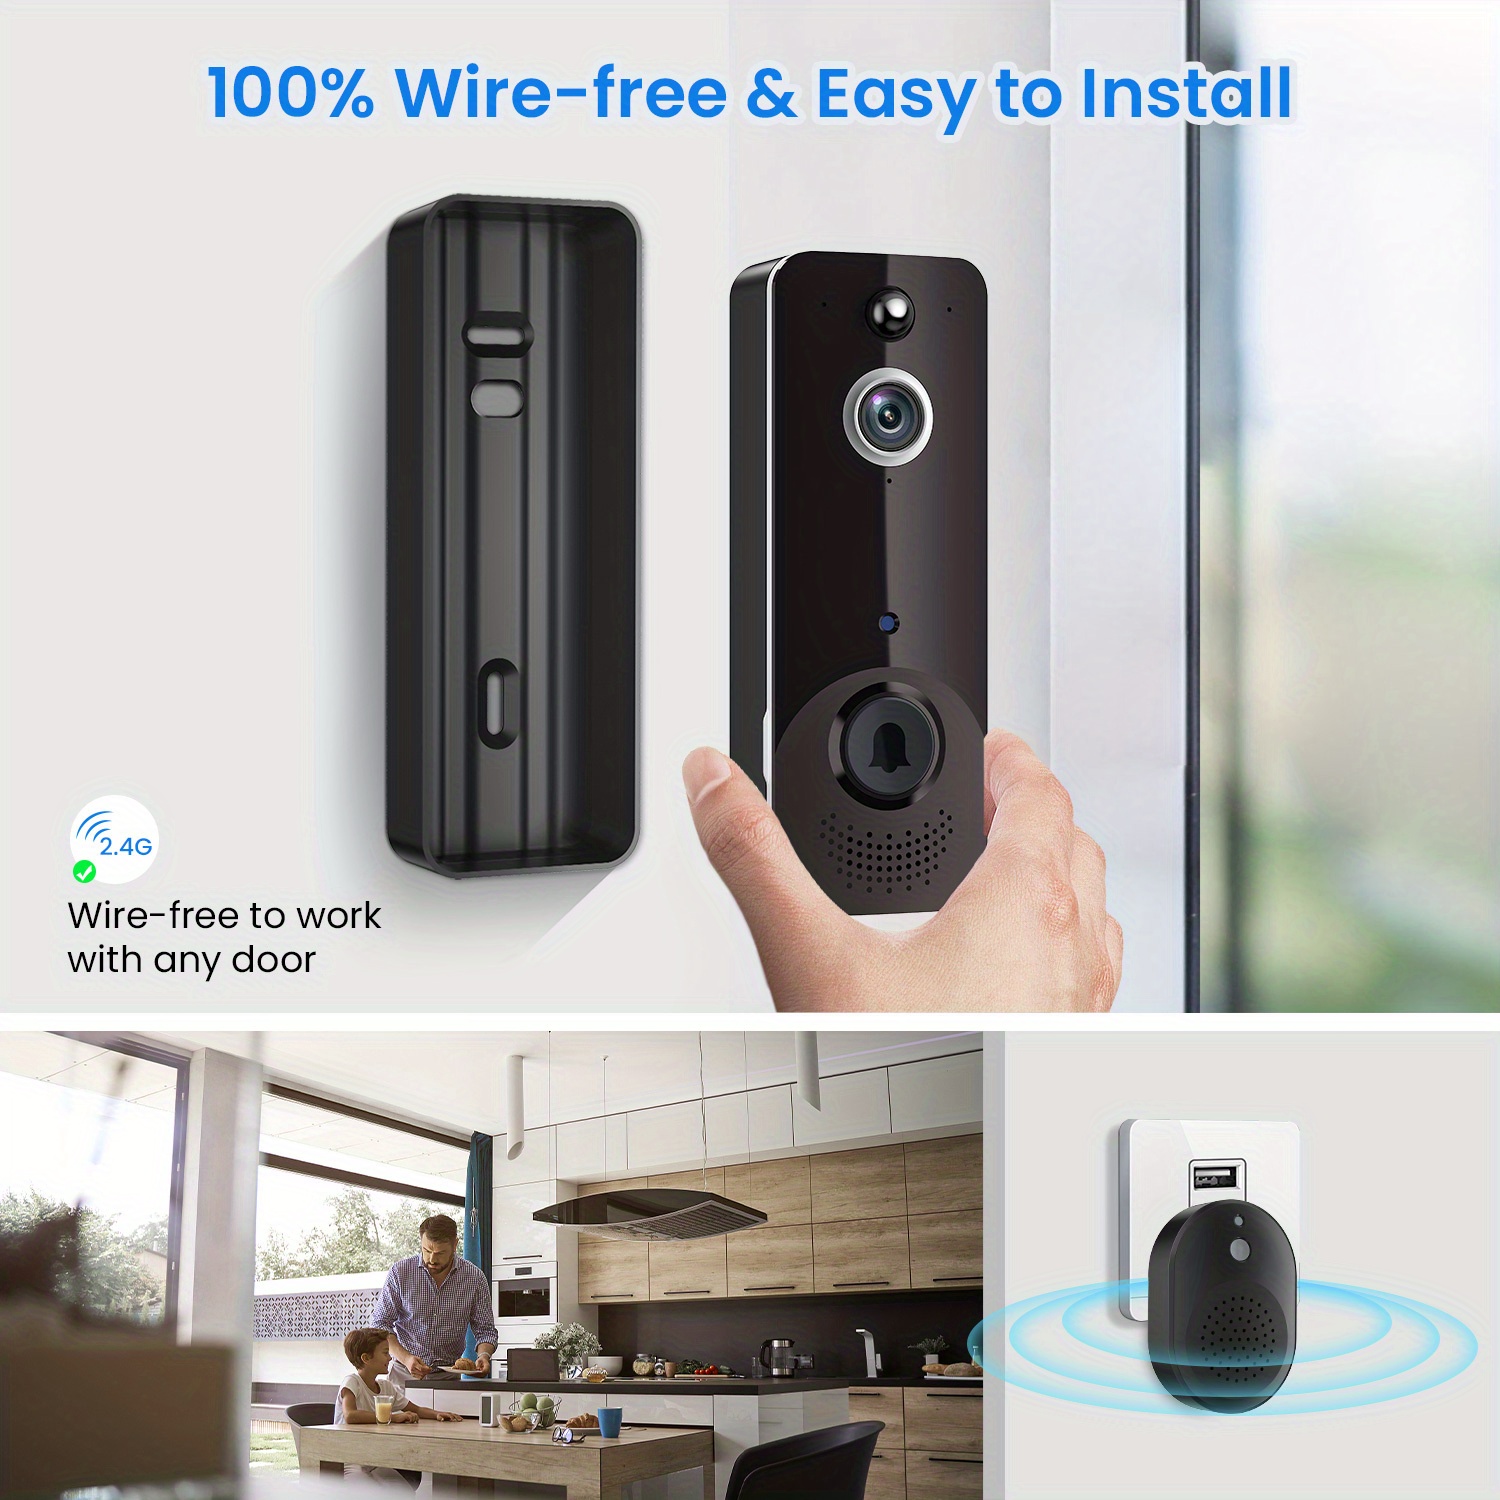 smart wireless doorbell camera with rechargeable batteries 2 way audio ai human detection pir motion detector 2 4g wifi hd live image night vision instant alerts cloud storage chime home security system details 6